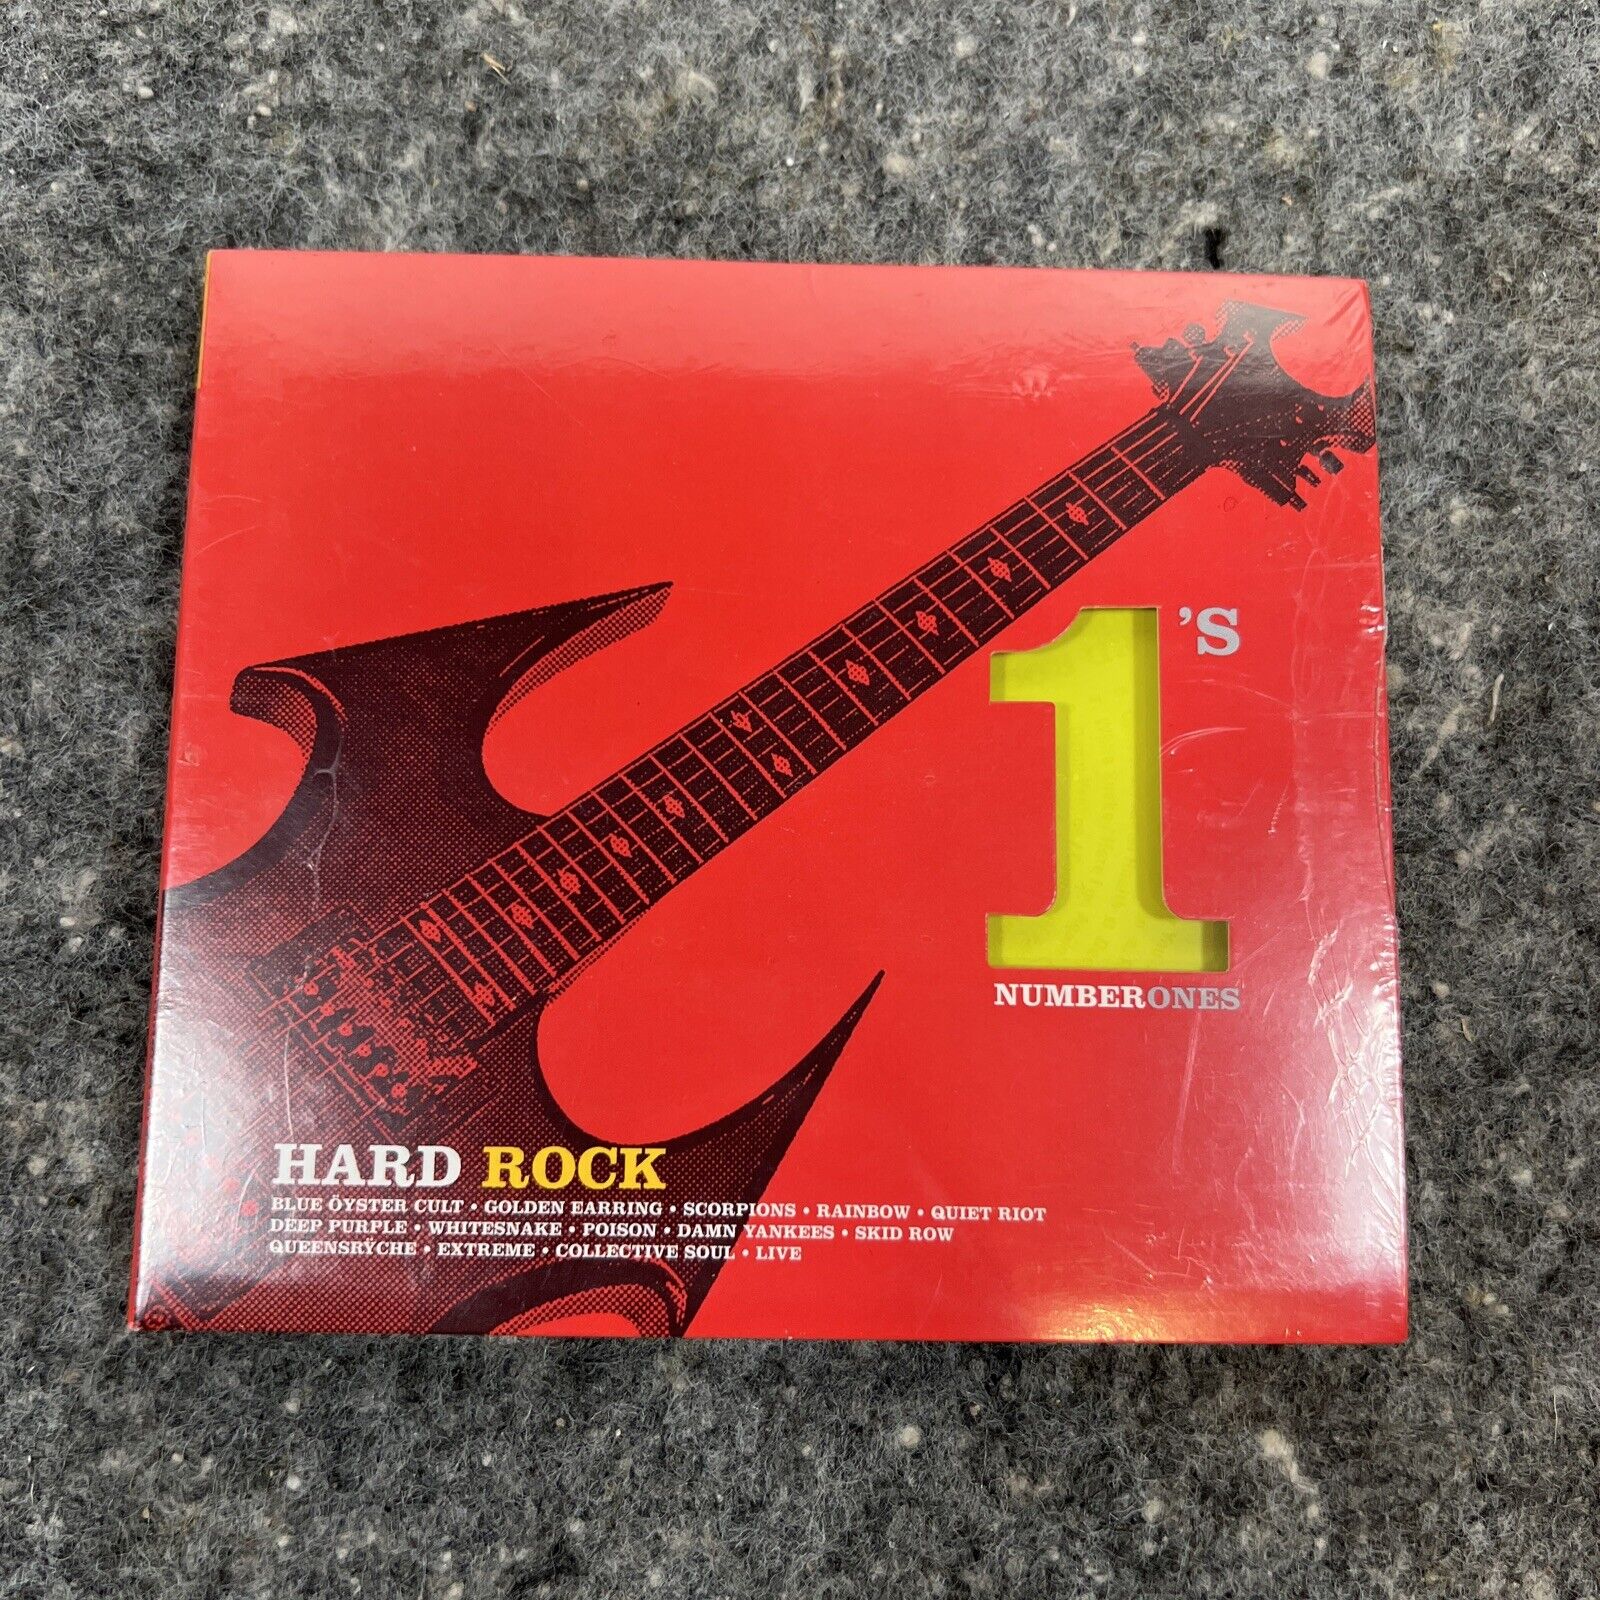 Hard Rock Number 1's (Ones) (CD) Scorpions, Quiet Riot, Poison, Extreme, Various